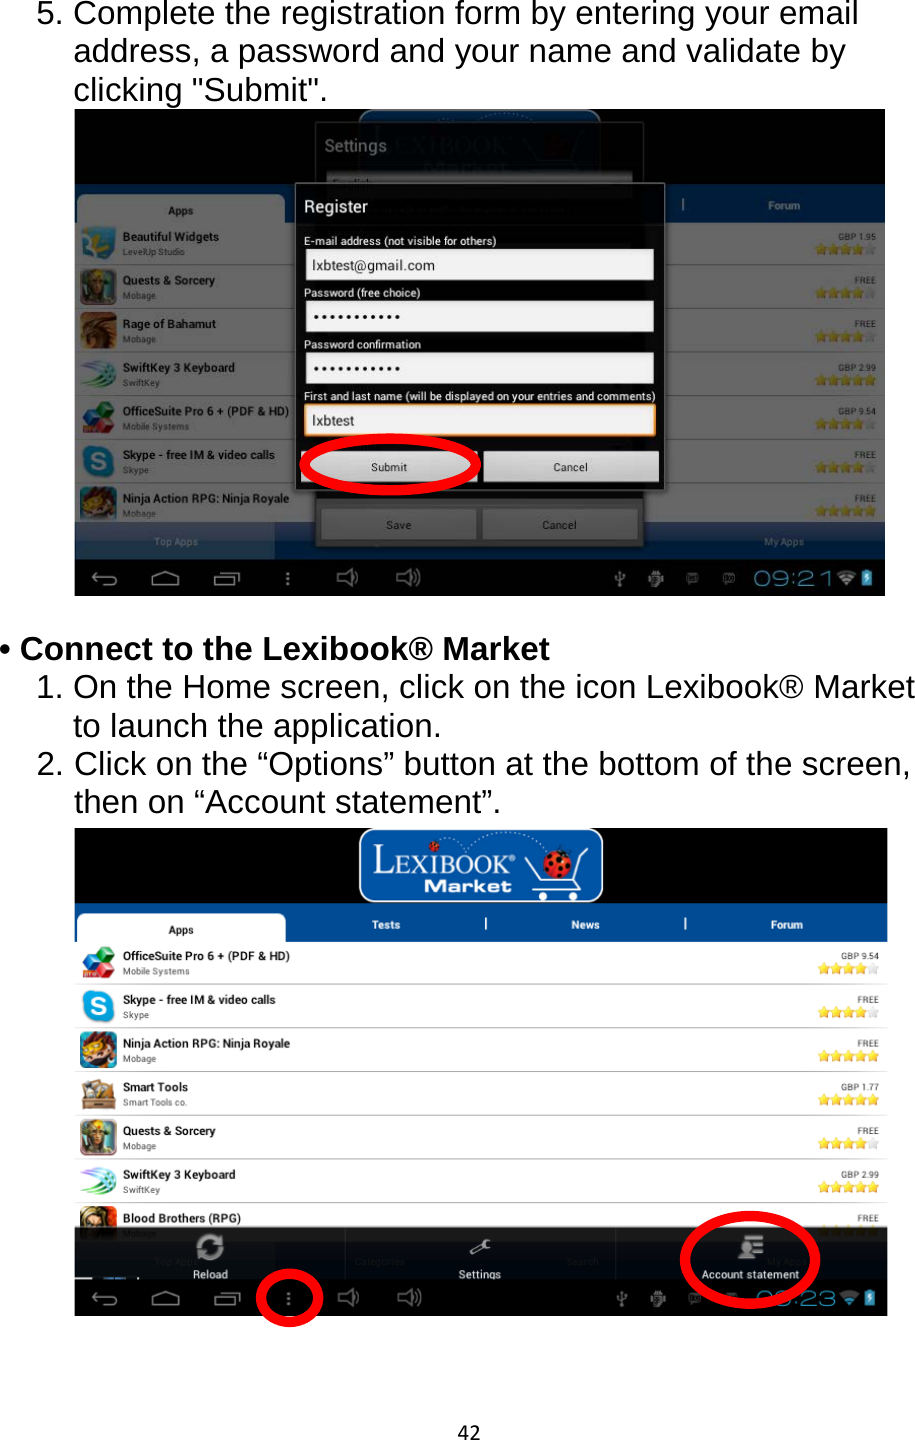 42  5. Complete the registration form by entering your email address, a password and your name and validate by clicking &quot;Submit&quot;.   • Connect to the Lexibook® Market 1. On the Home screen, click on the icon Lexibook® Market to launch the application. 2. Click on the “Options” button at the bottom of the screen, then on “Account statement”.   